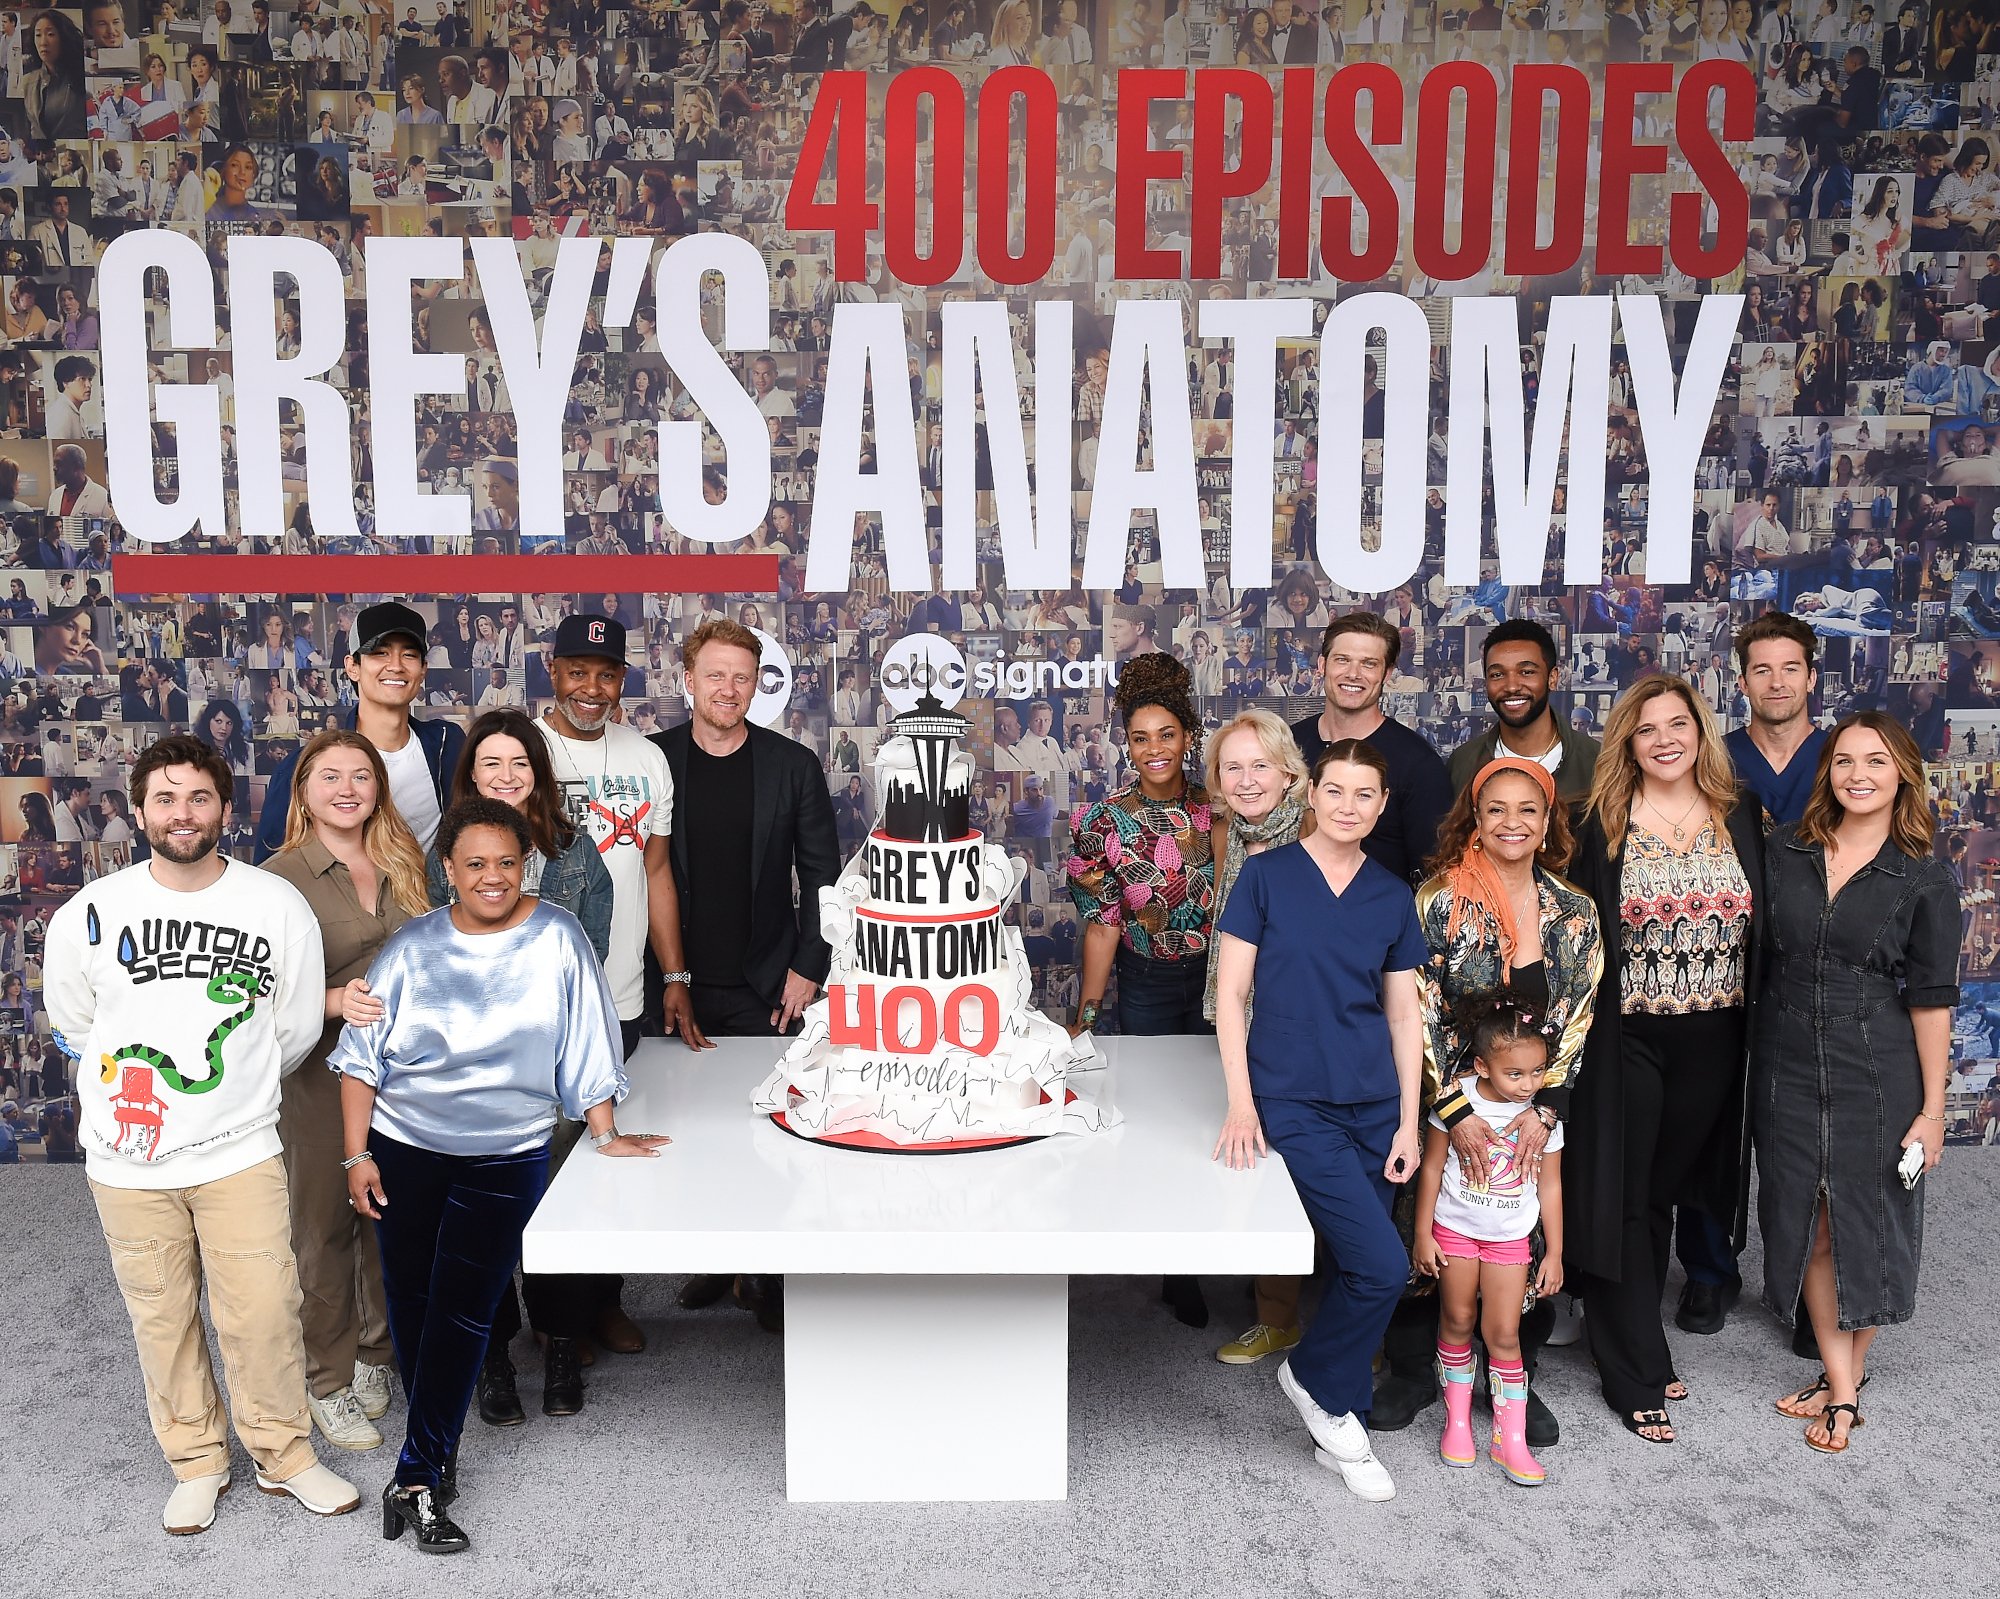 The 'Grey's Anatomy' cast, who discussed the possibility of the show ending at the 400-episode celebration. They're standing around a tall, white cake with 'Grey's Anatomy 400' on the front. They're also standing in front of a wall with pictures from the ABC series over the years.